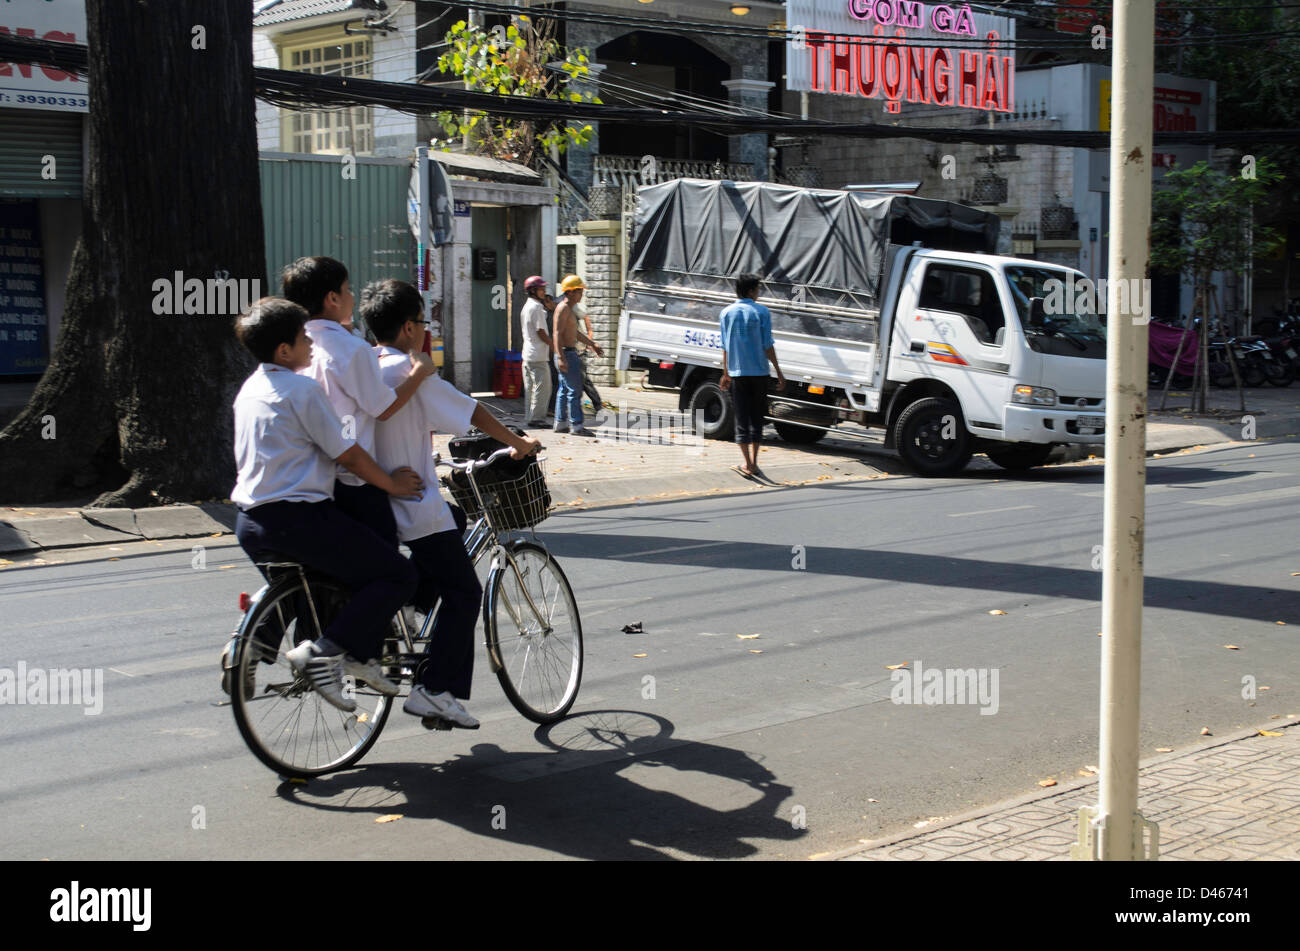 Three boys on a bicycle in Ho Chi Minh City in Vietnam Stock Photo